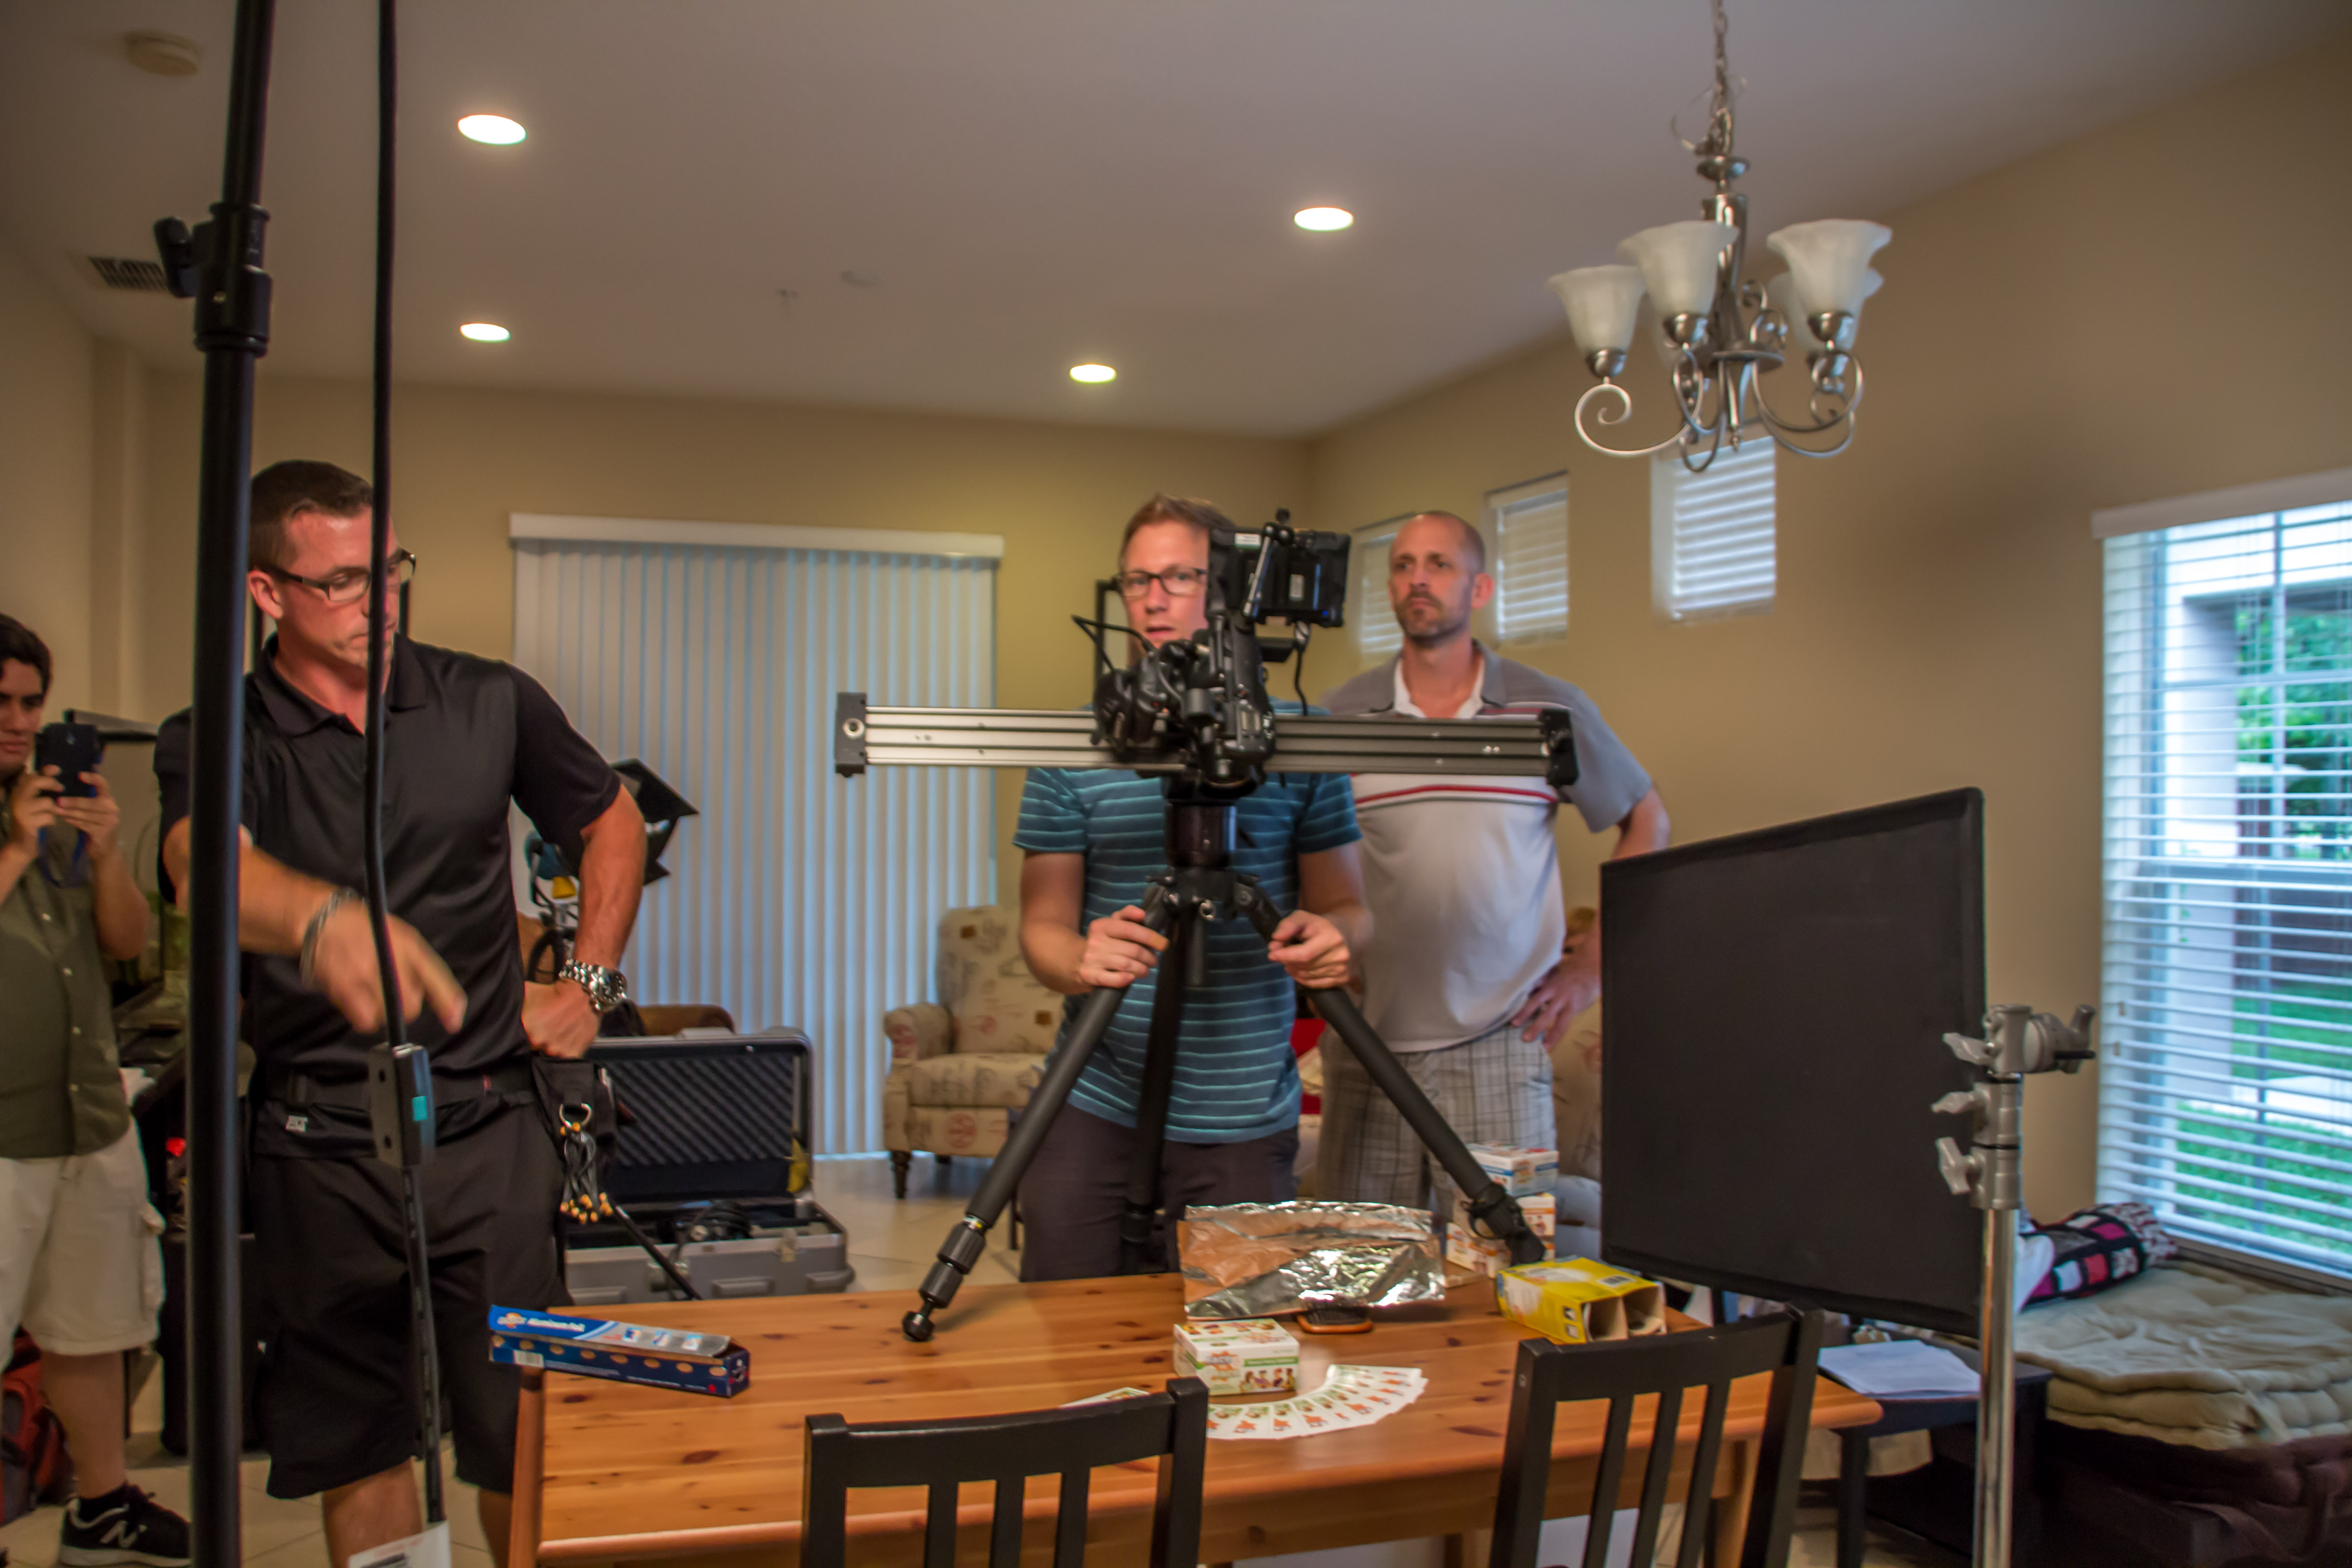 Director Trevor F. Ward behind the scenes of a commercial shoot with DP Ryan P. Dean and 1st AC Franklin Whitlatch.